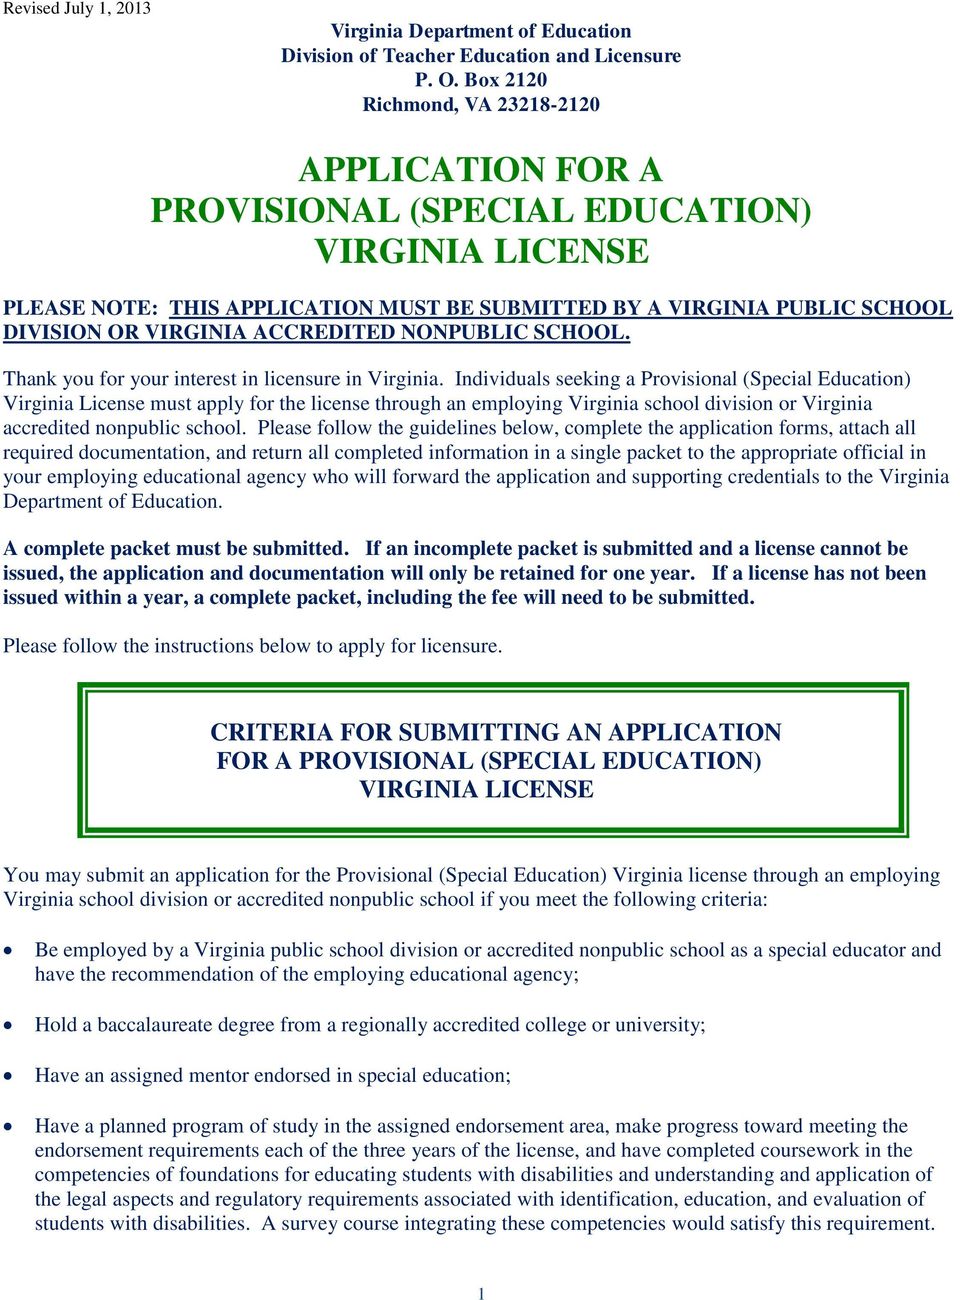 Individuals seeking a Provisional (Special Education) Virginia License must apply for the license through an employing Virginia school division or Virginia accredited nonpublic school.